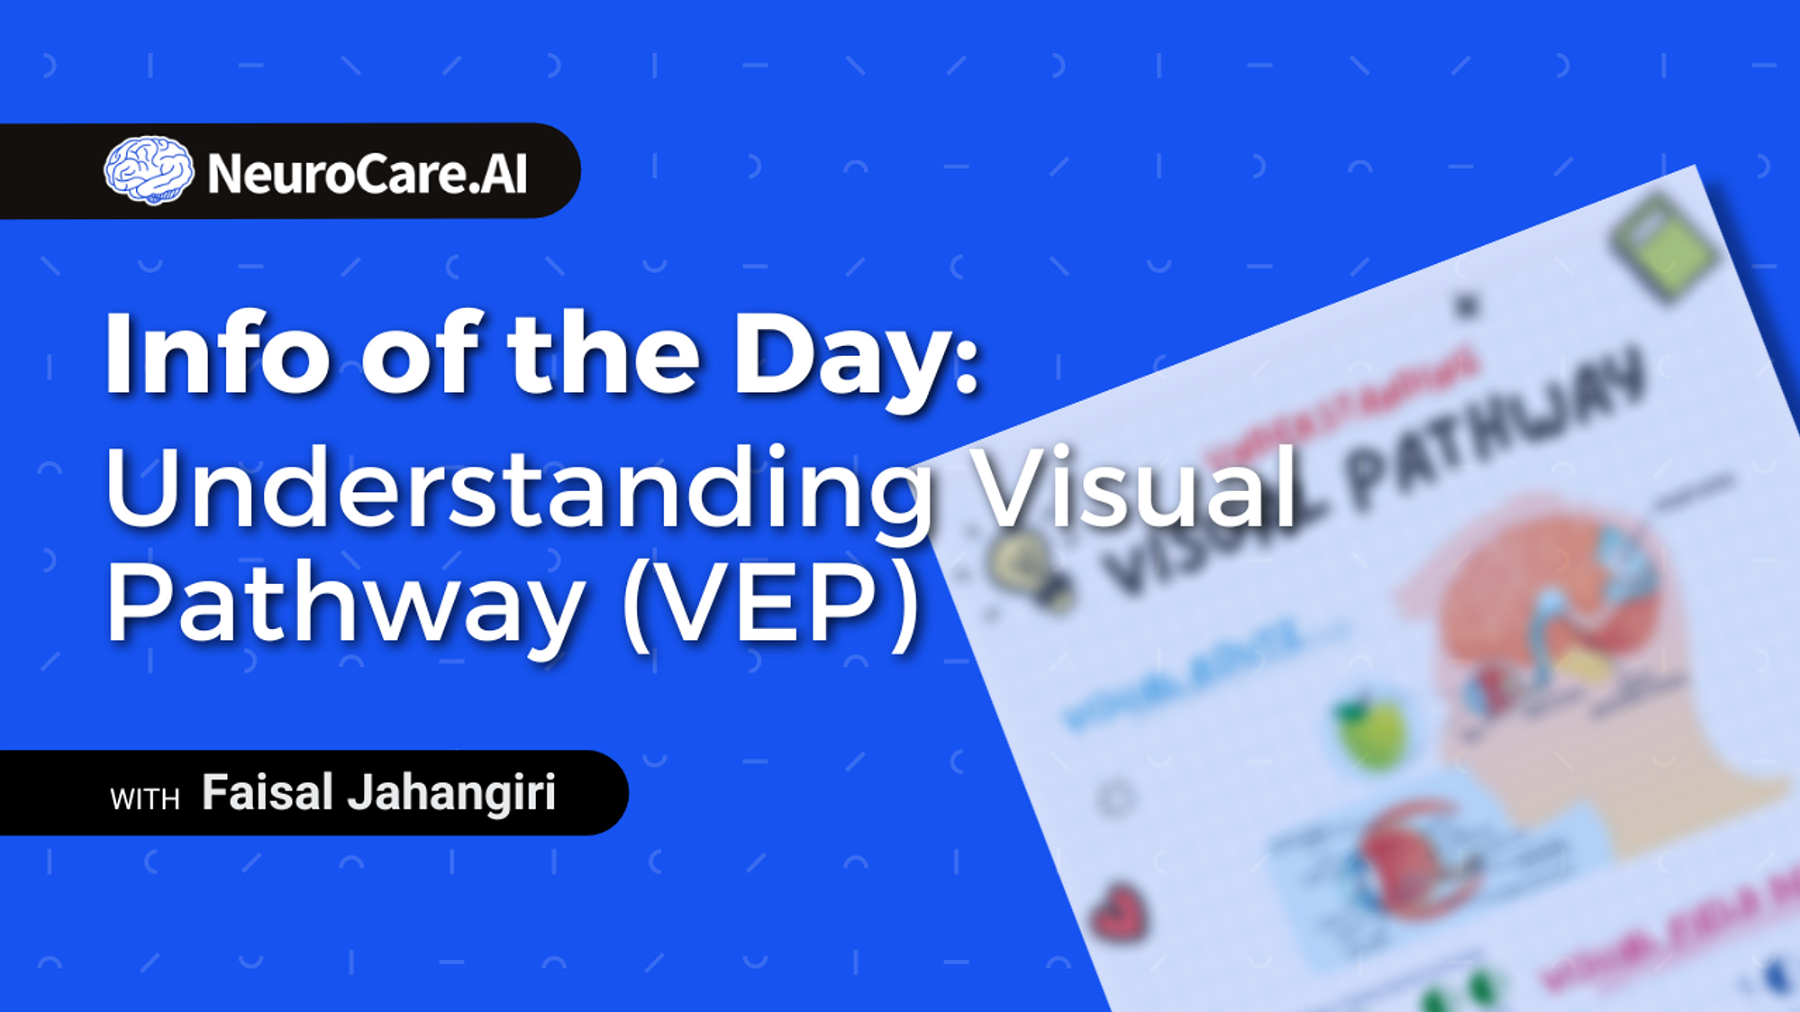 Info of the Day: "Understanding Visual Pathway (VEP)"